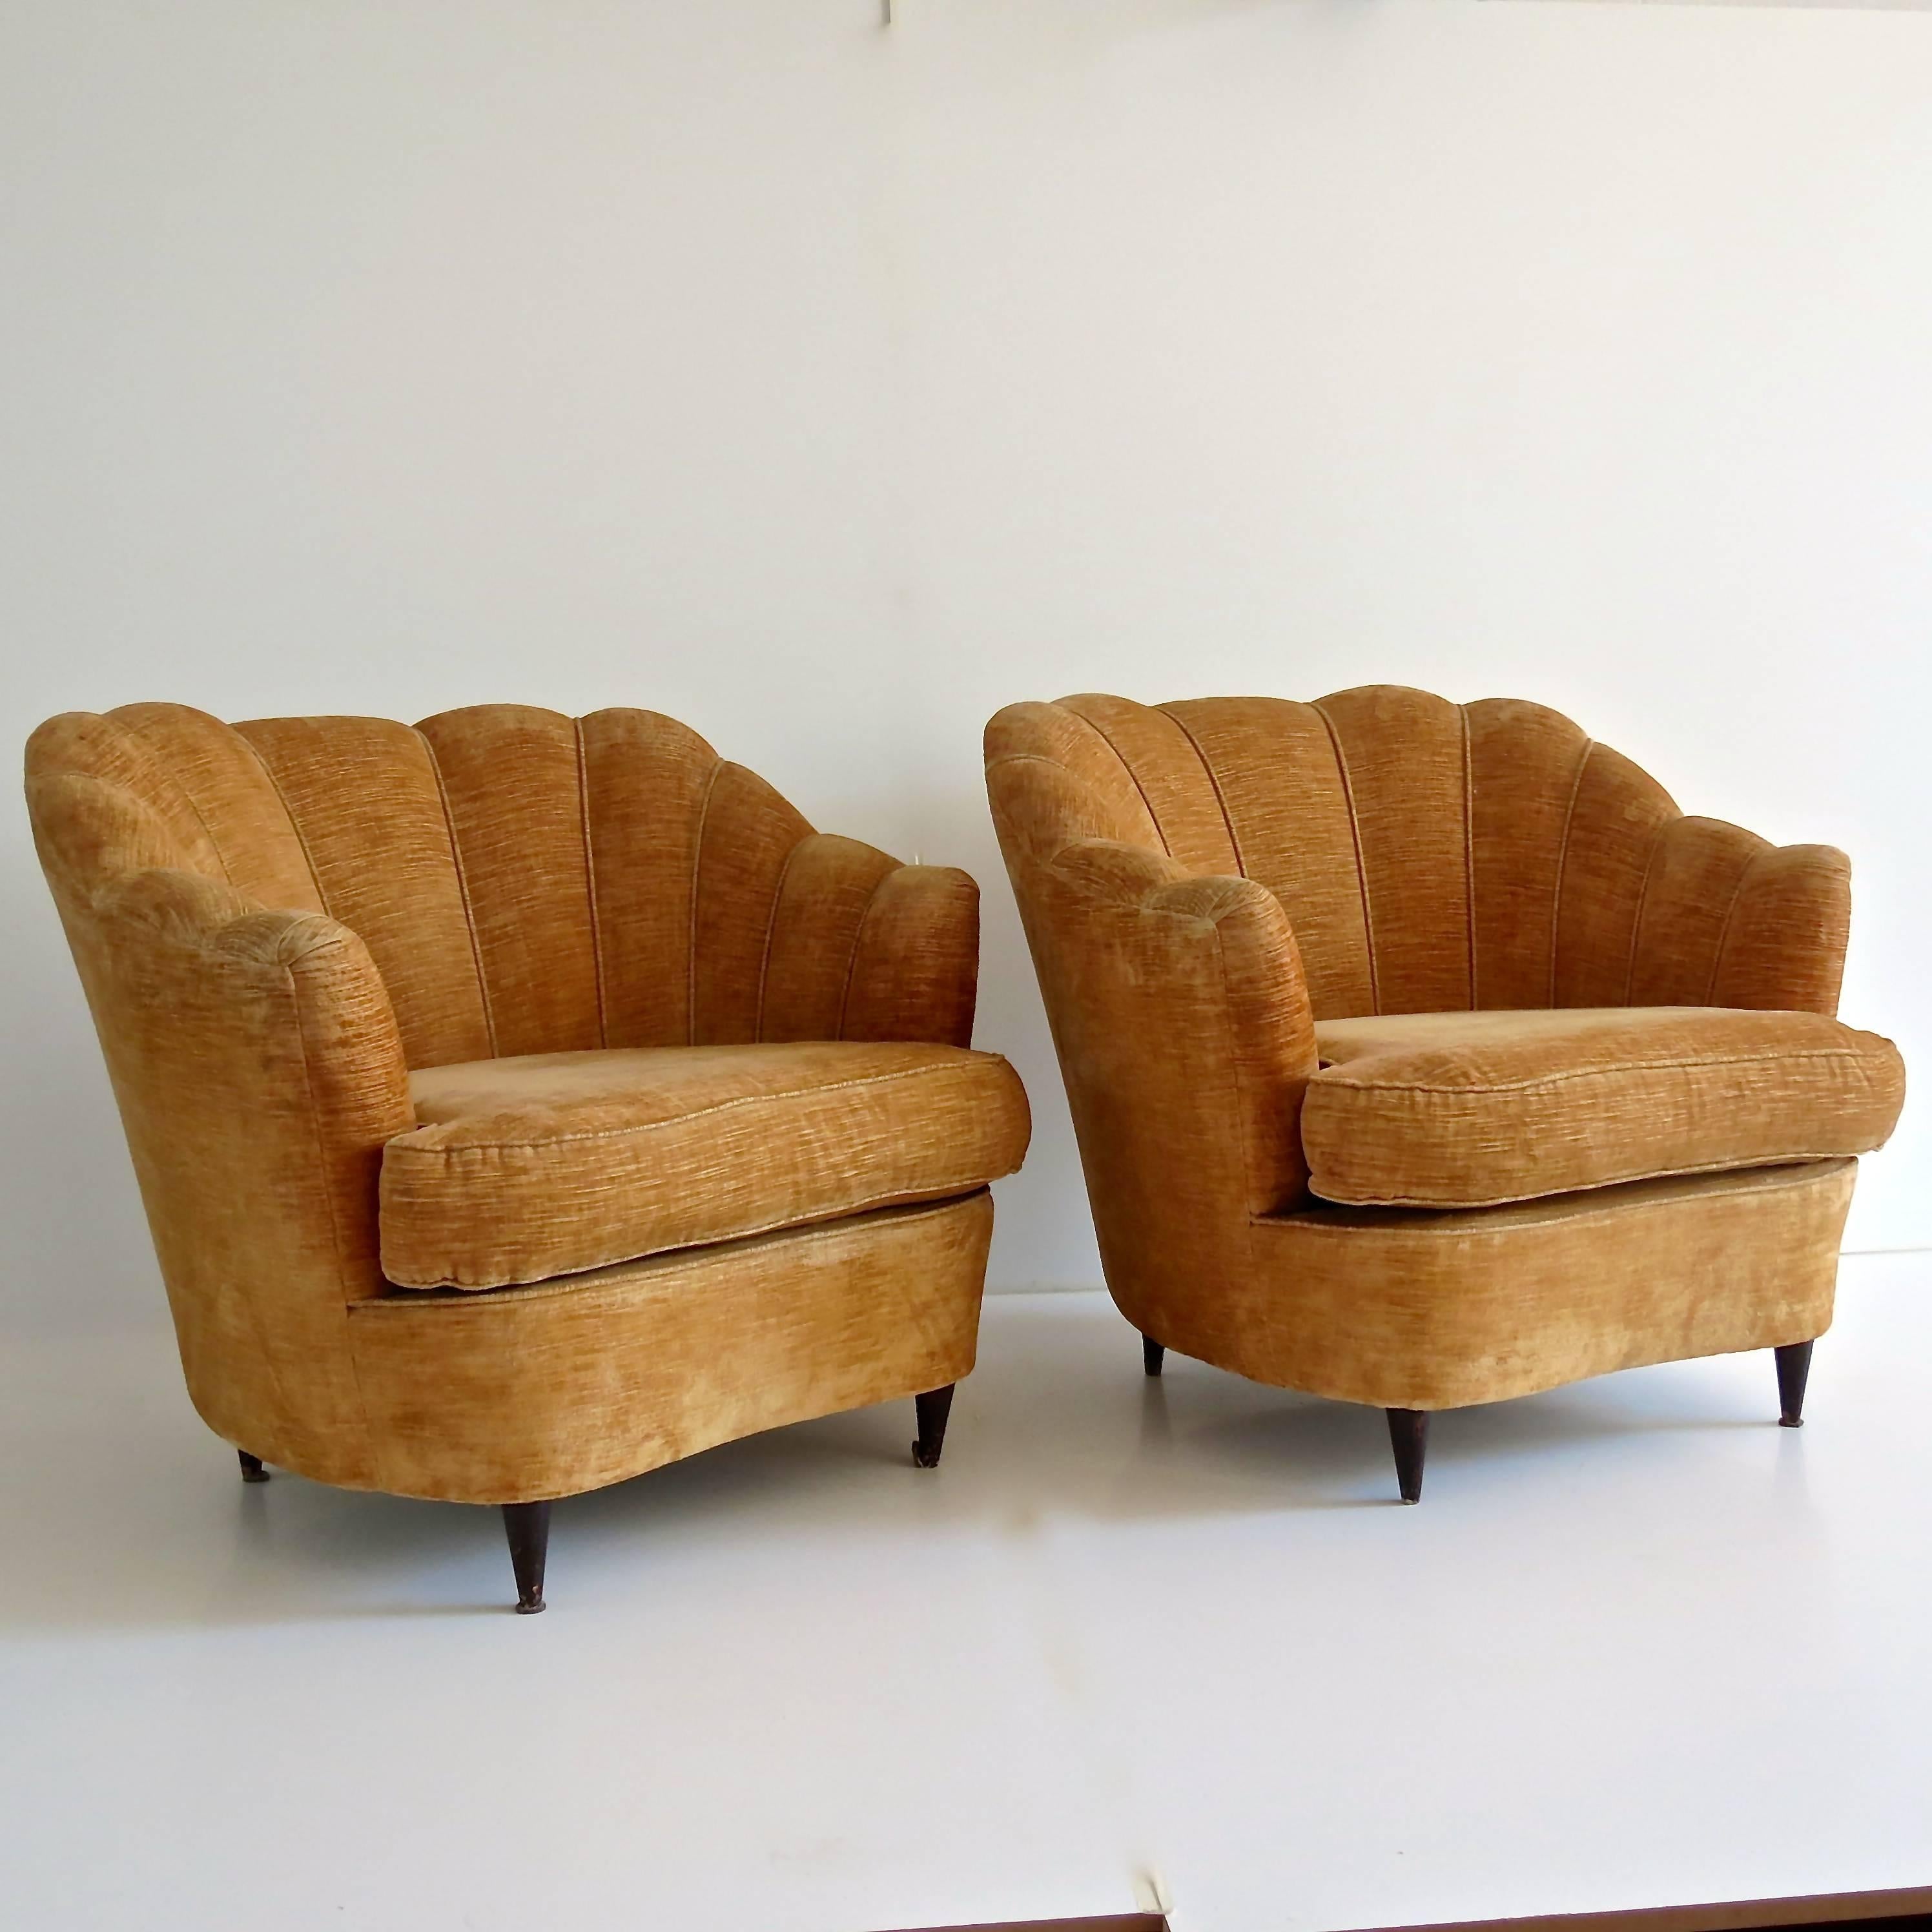 Fine and elegant pair of armchairs attributed to Guglielmo Ulrich, 1950
Original velvet coating, walnut
gold velvet 
Very good condition
Measures: Height 85cm 92 x 88 cm; seat height 47 cm, arm height 64 cm.